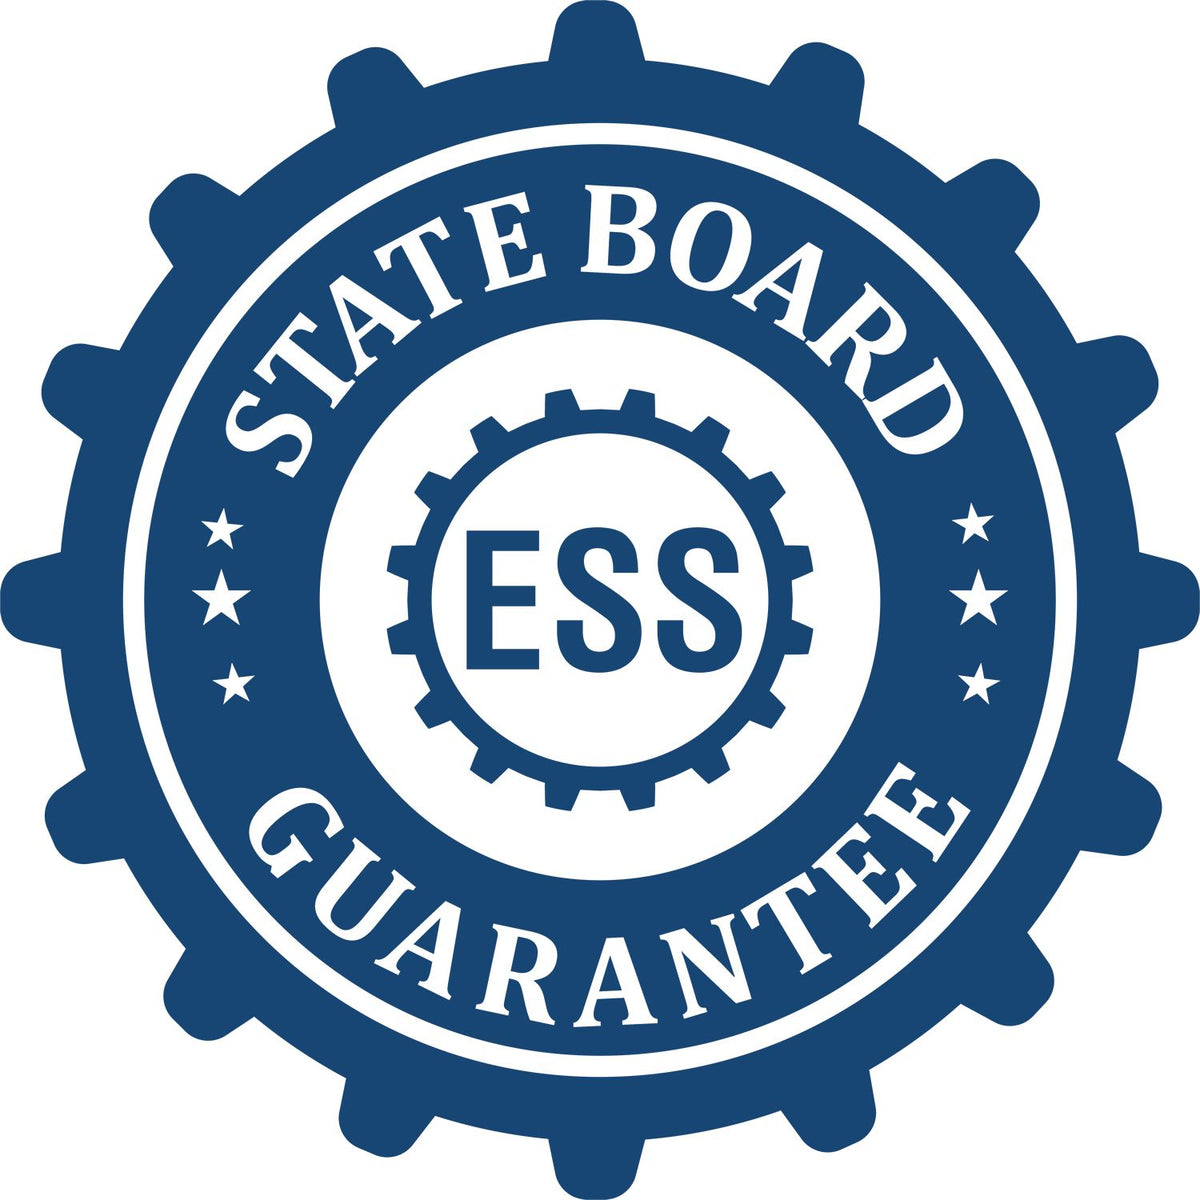 An emblem in a gear shape illustrating a state board guarantee for the Heavy Duty Cast Iron Arizona Architect Embosser product.